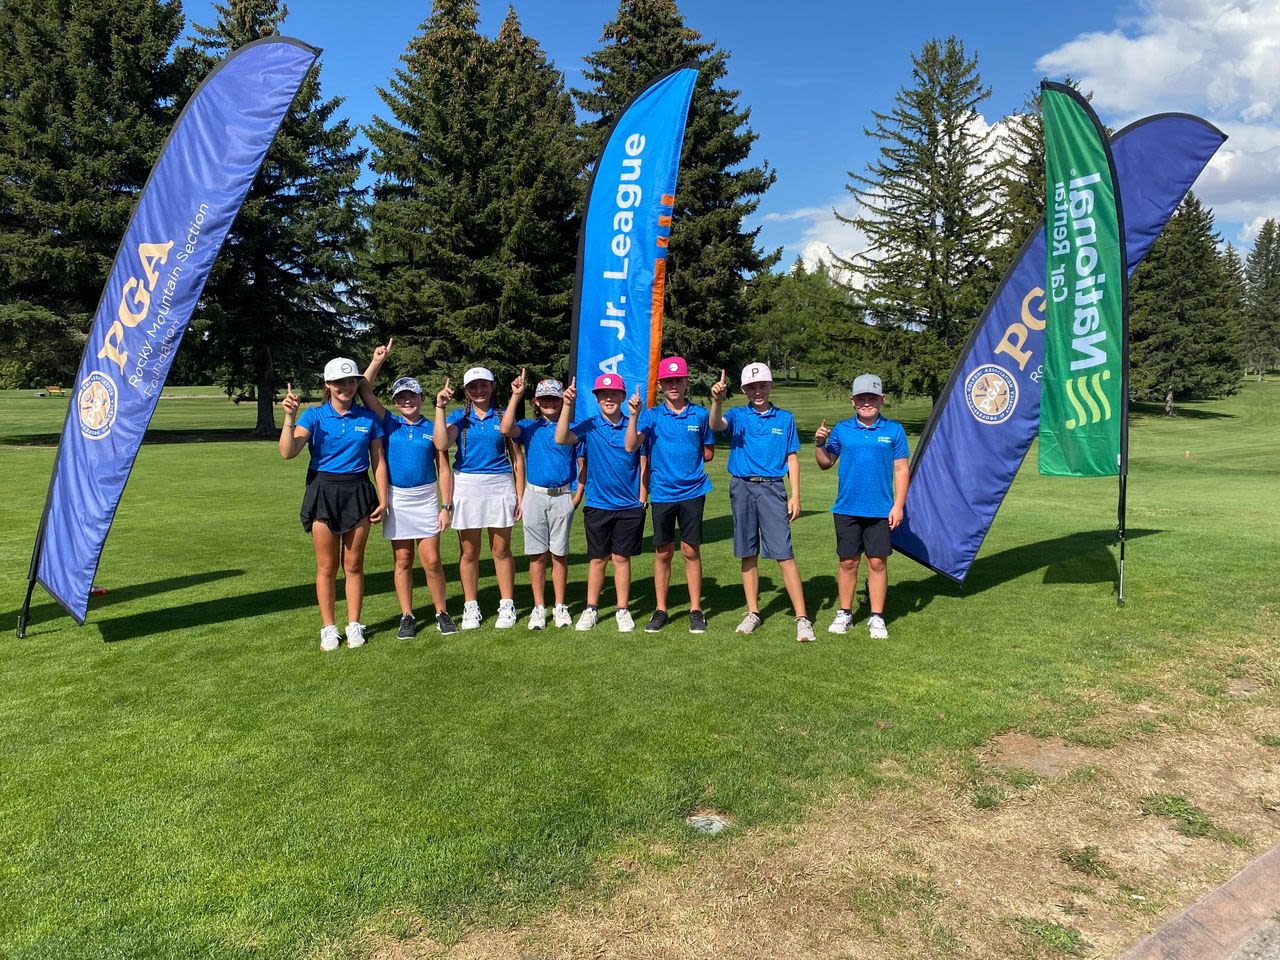 The All-Stars from Canyon Springs Golf Course in Twin Falls, ID.